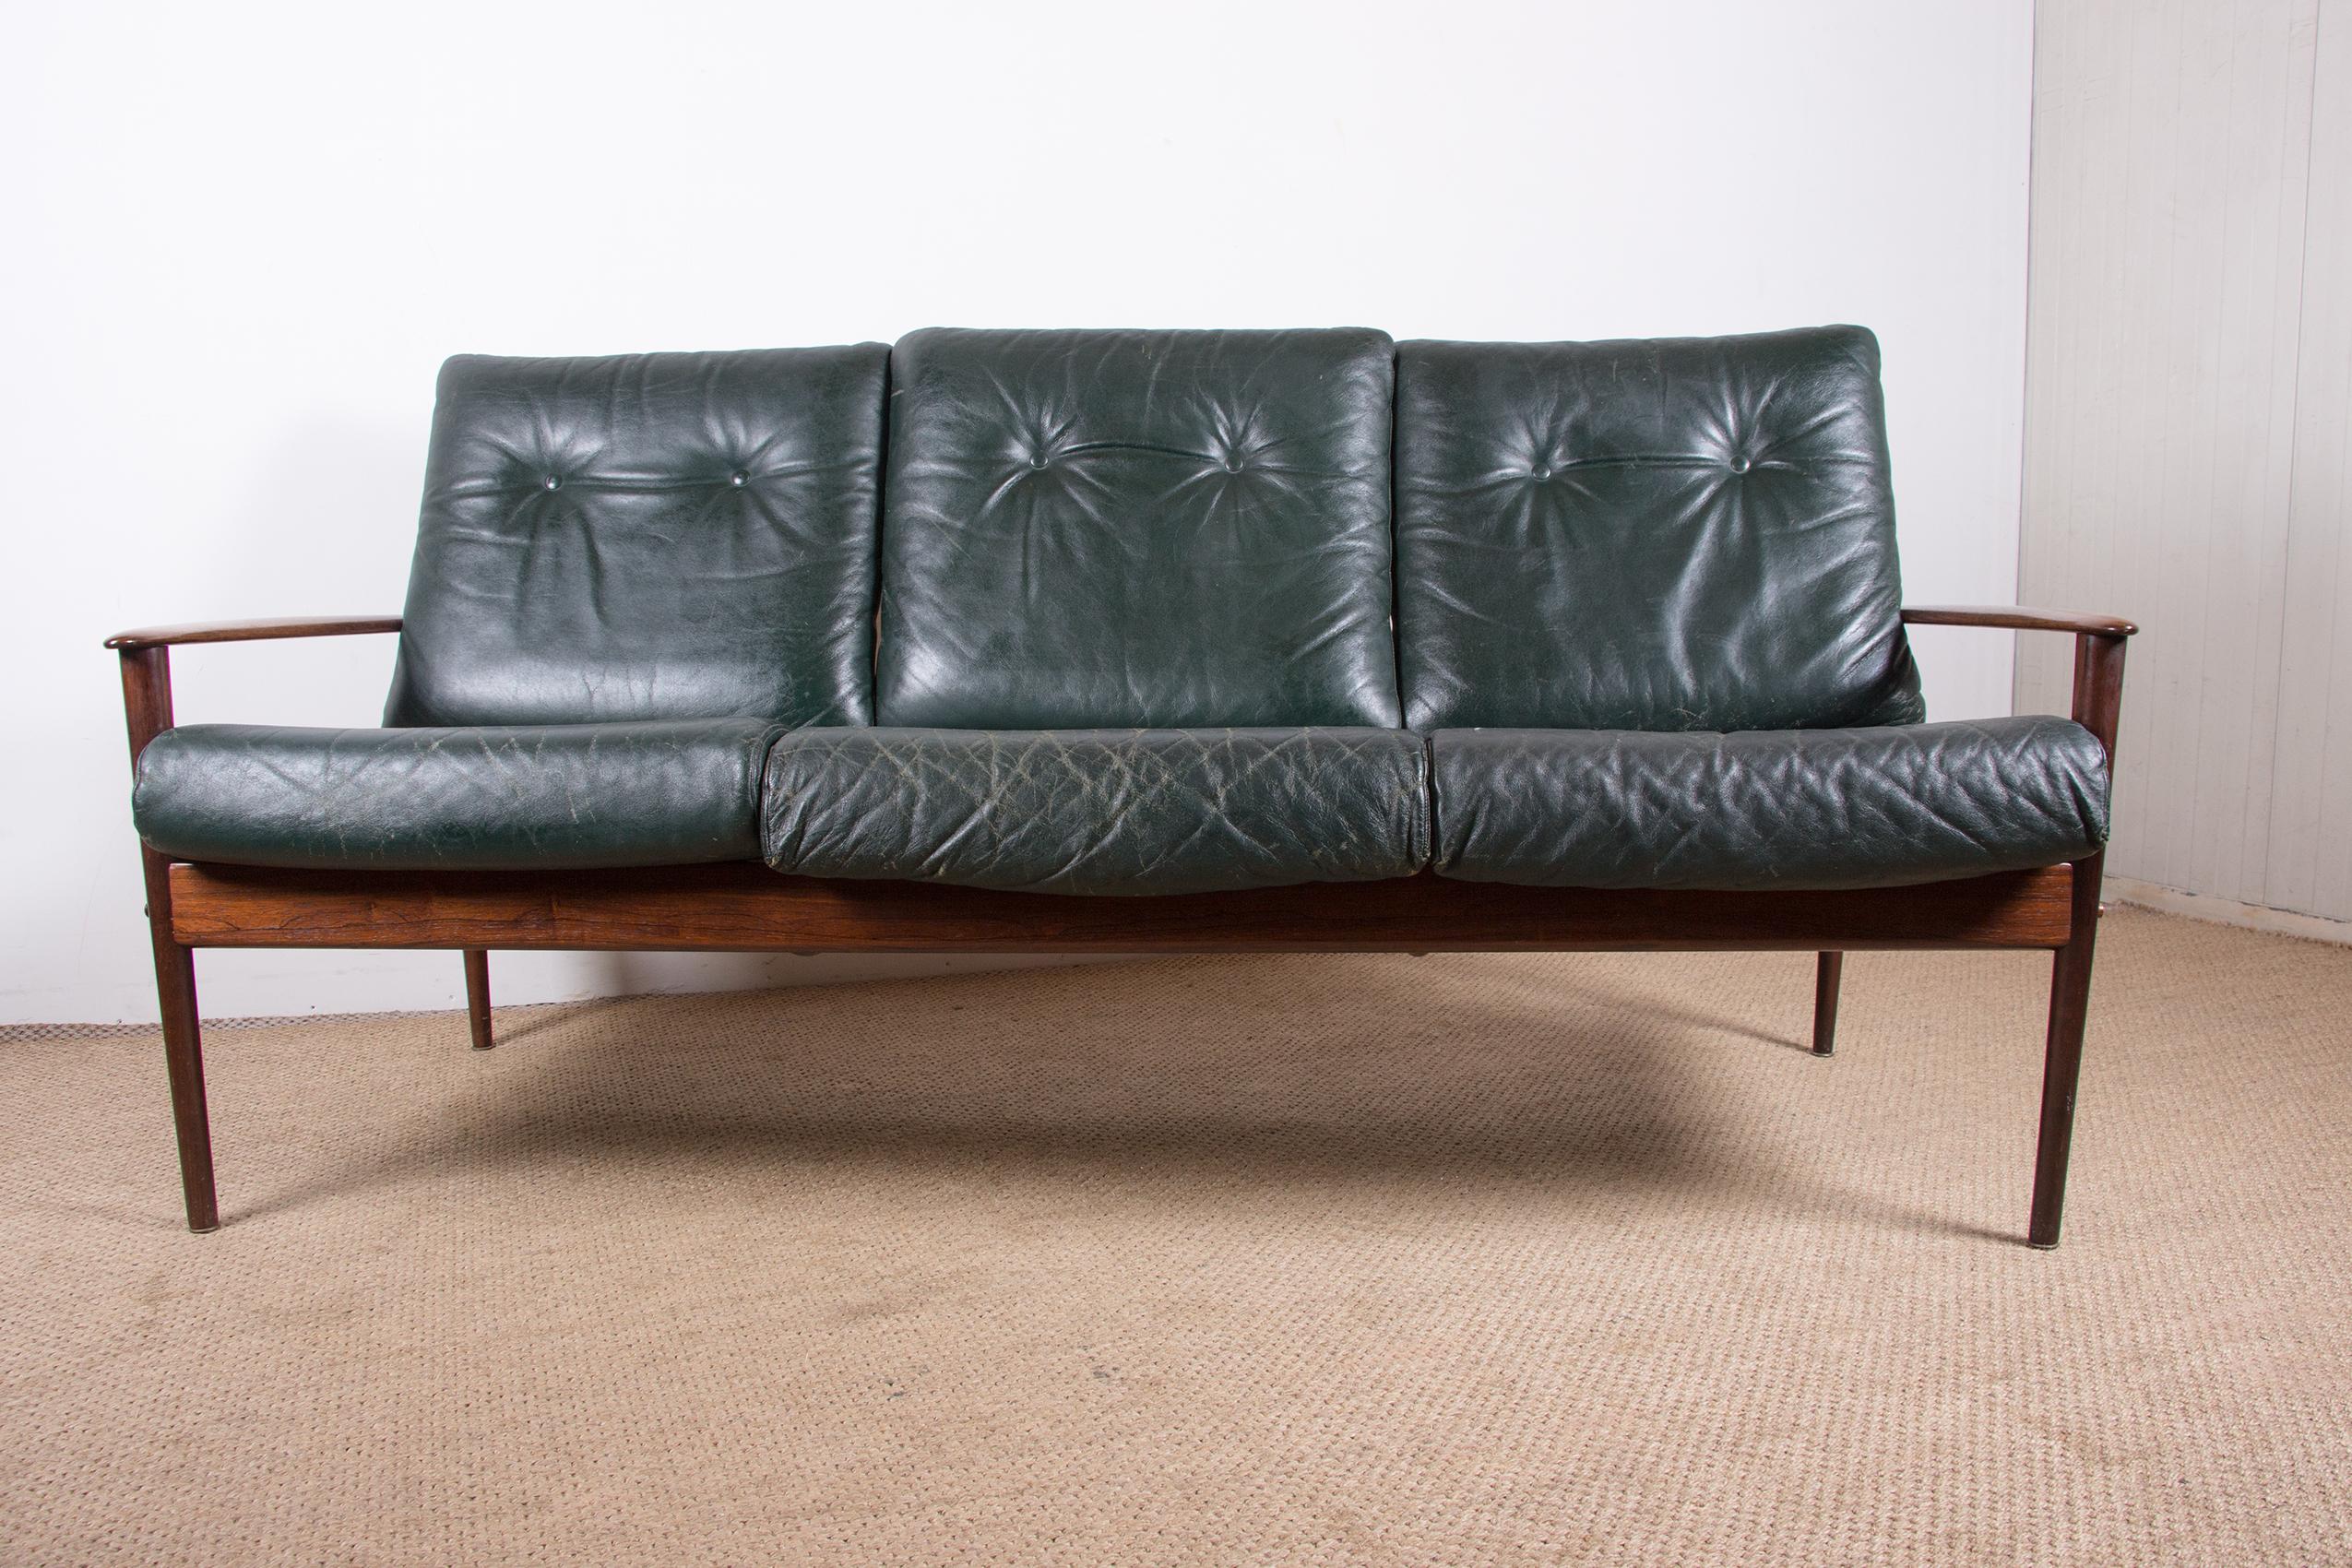 Danish 3 seater sofa, Rosewood and Leather by Grete Jalk for Poul Jepessen 1960. 11